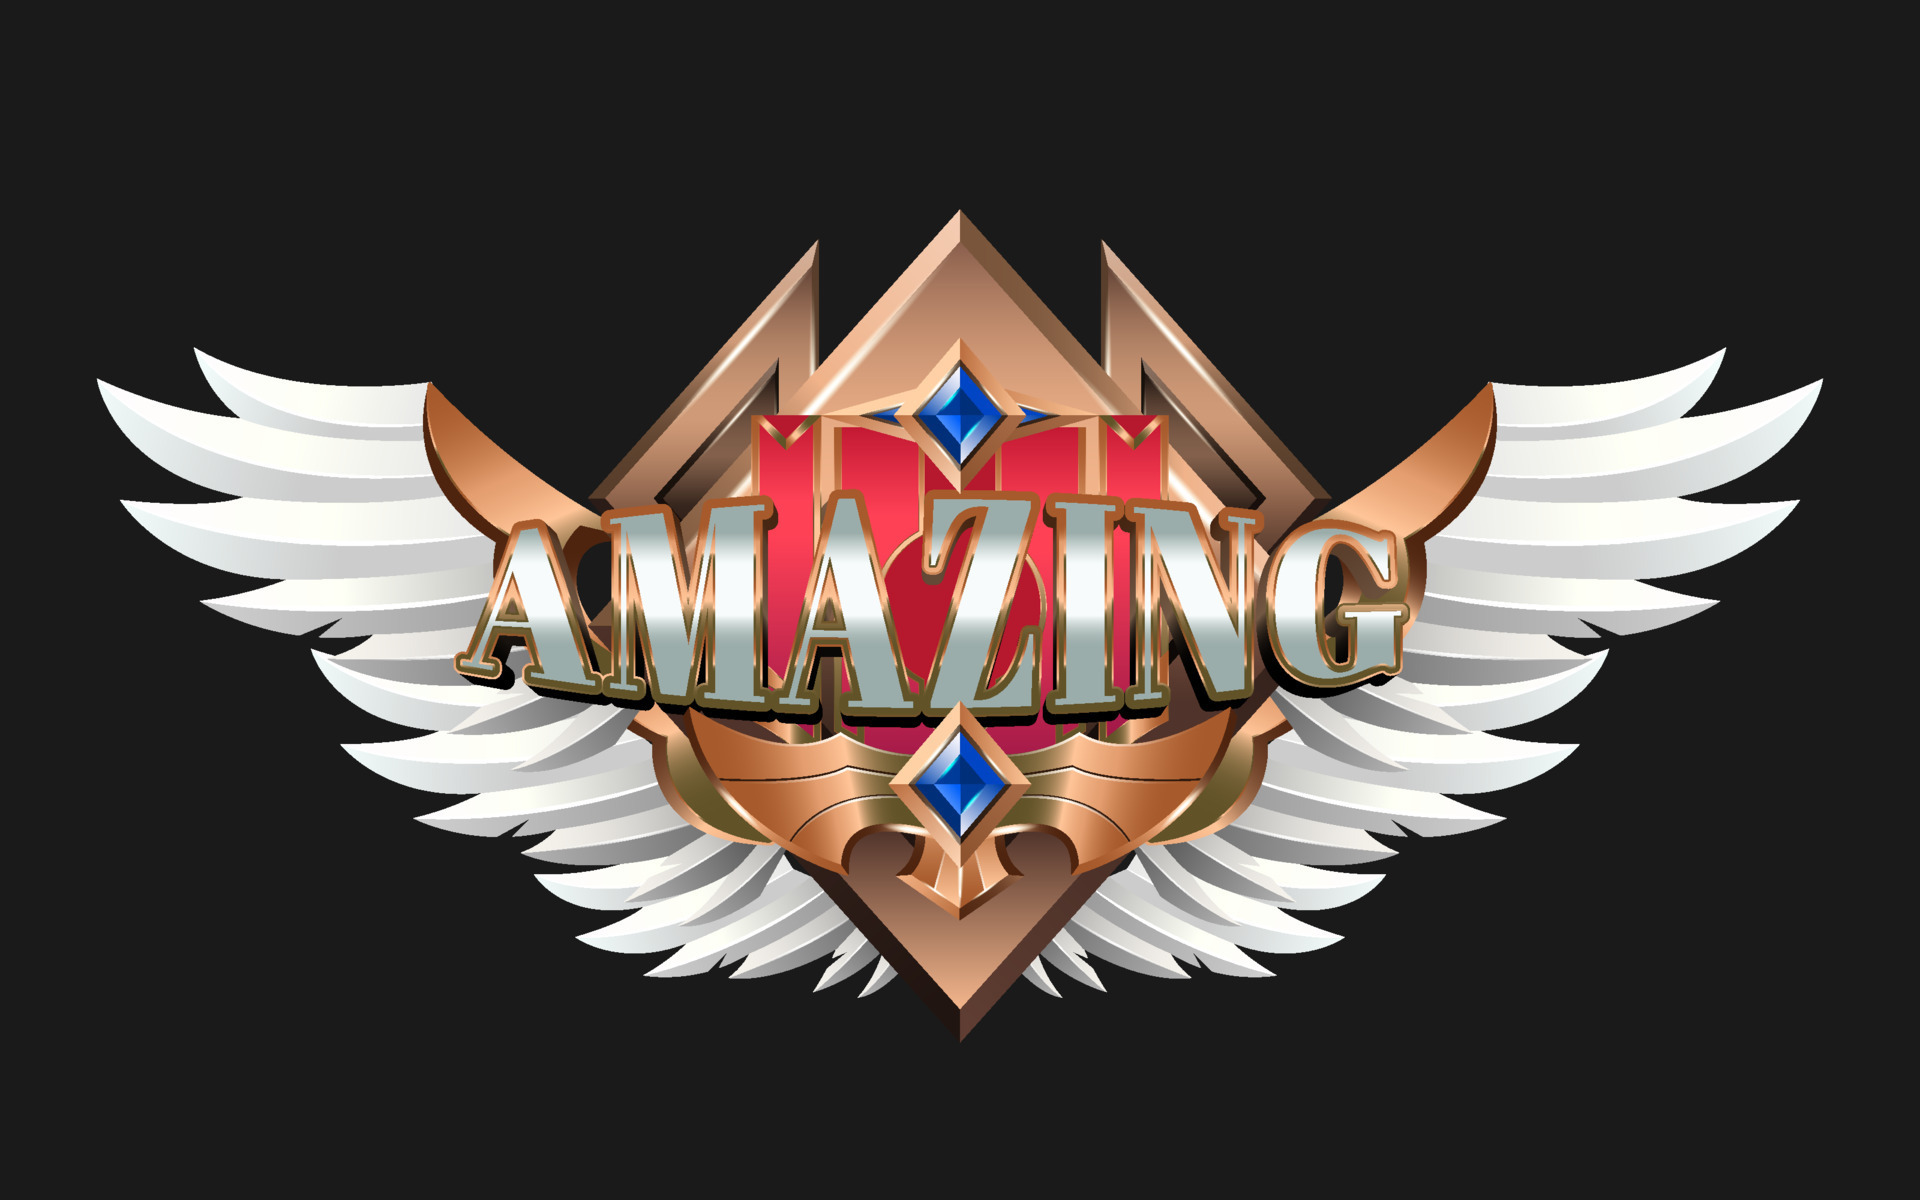 game-achievement-badge-logo-element-with-amazing-text-effect-vector.jpg